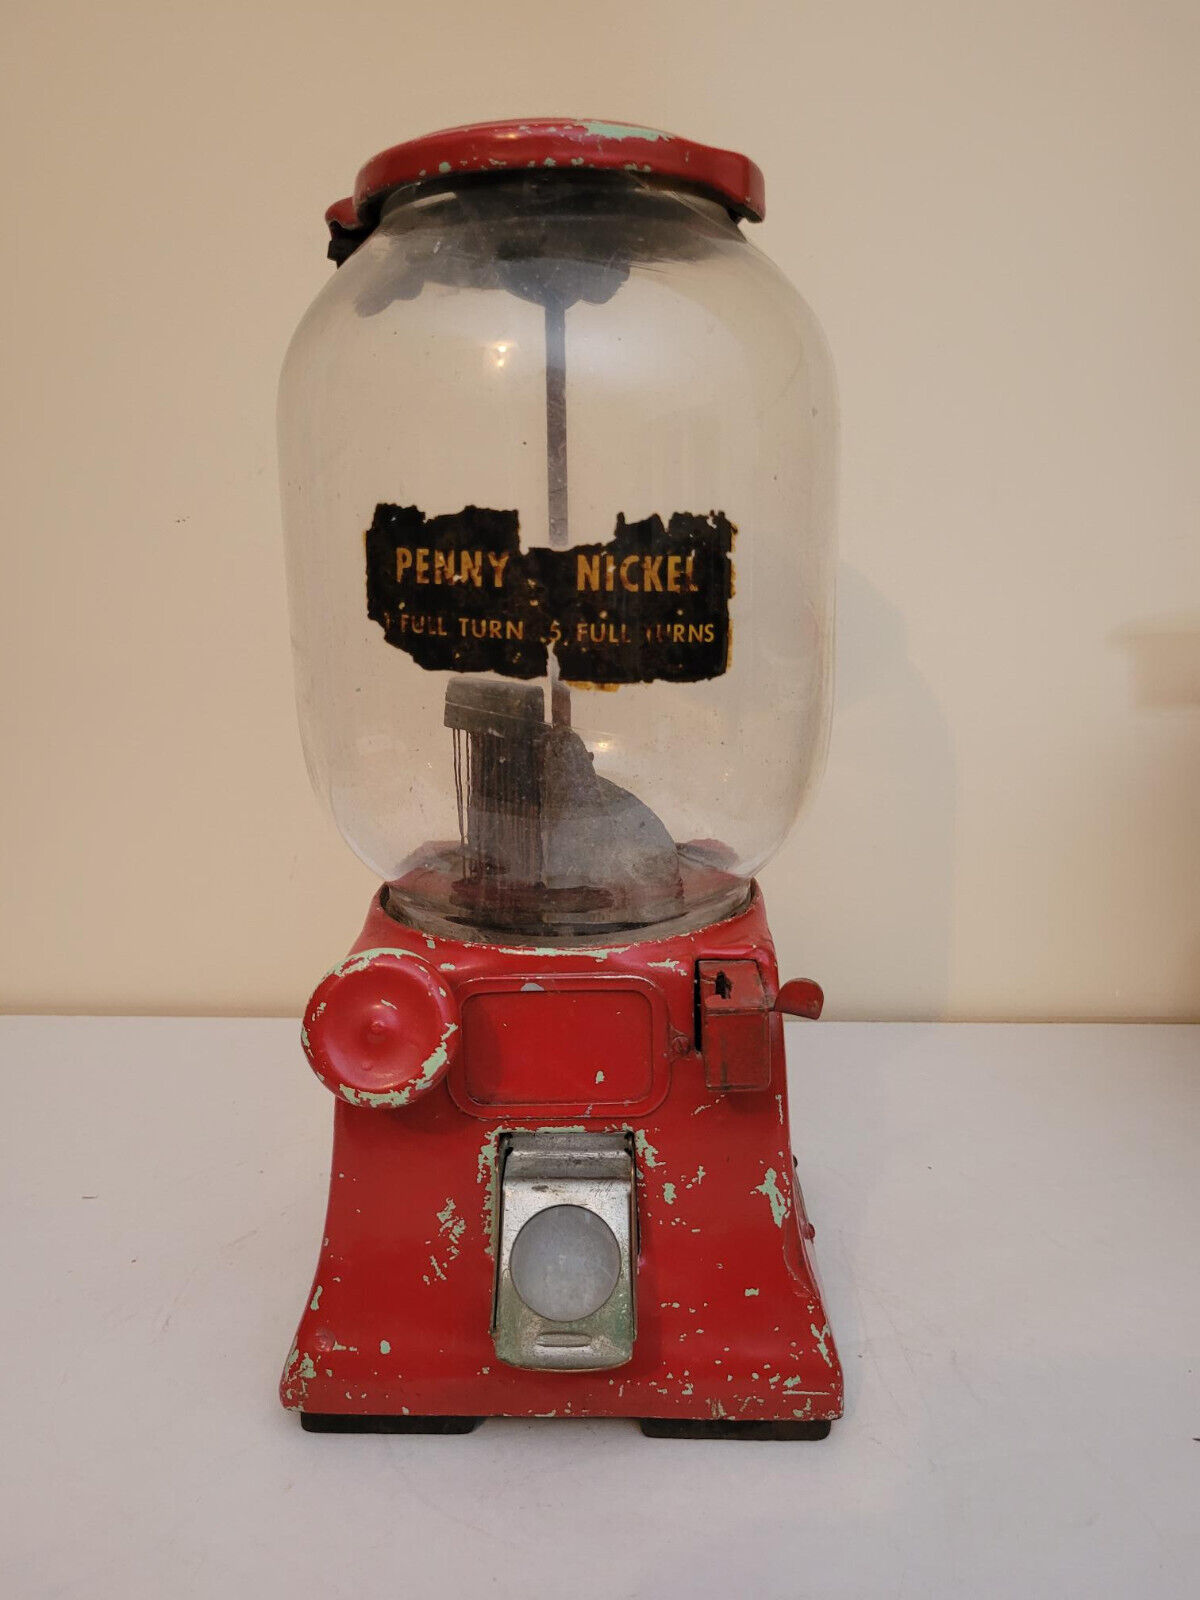 RARE  1930'S NORTHWESTERN 31  PENNY-NICKEL PORCELAIN GUMBALL MACHINE - AS IS